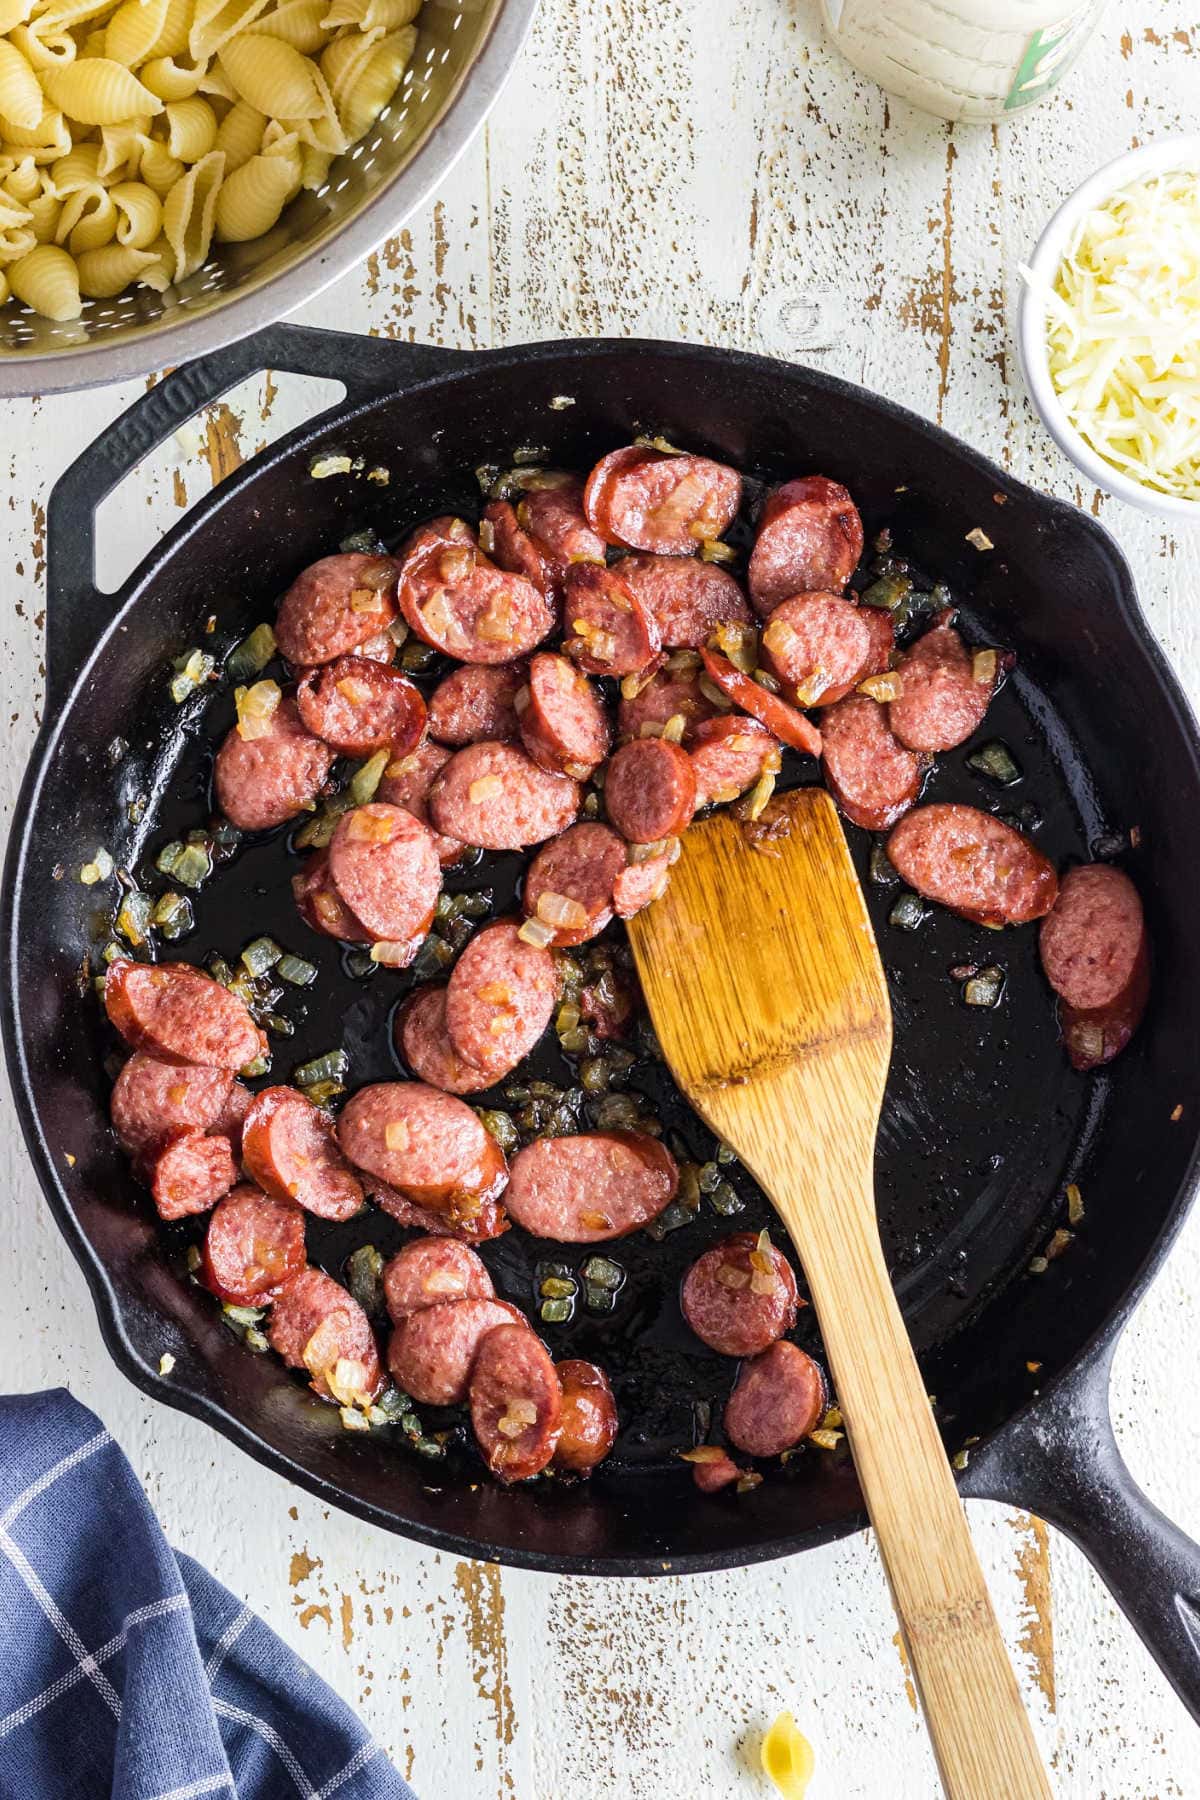 Sliced smoked sausage in a skillet.